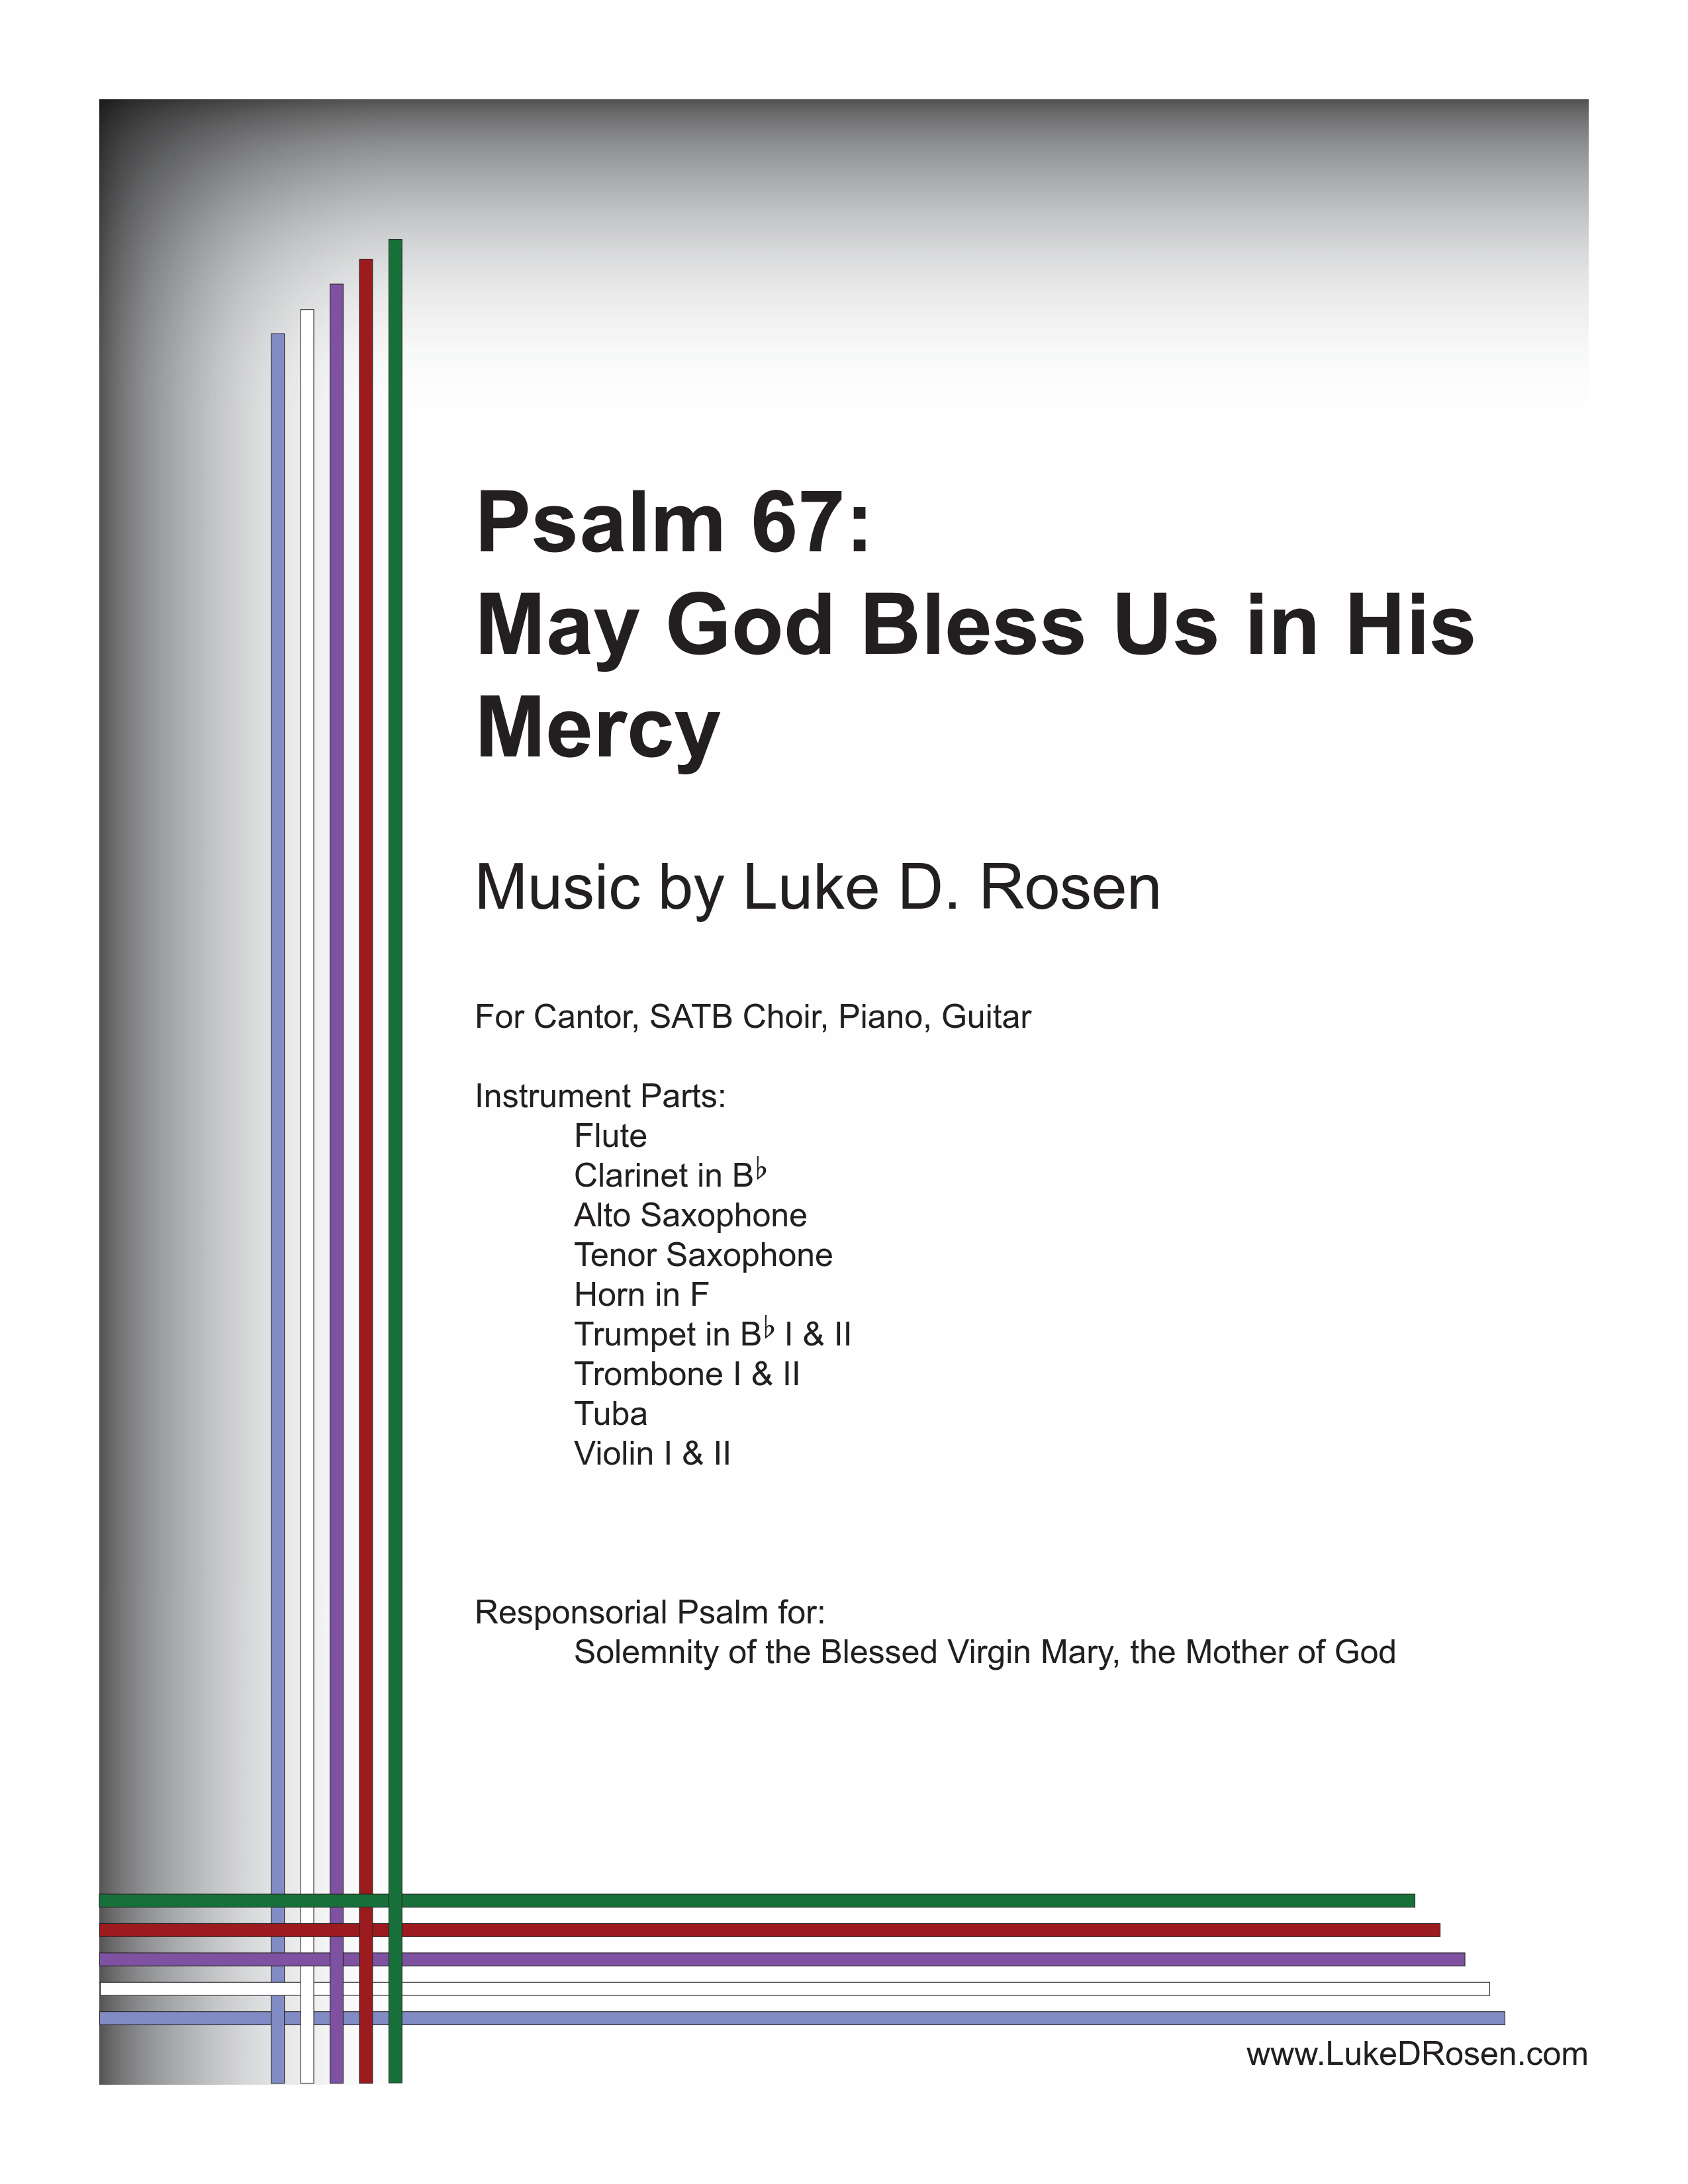 Psalm 67 – May God Bless Us in His Mercy (Rosen)